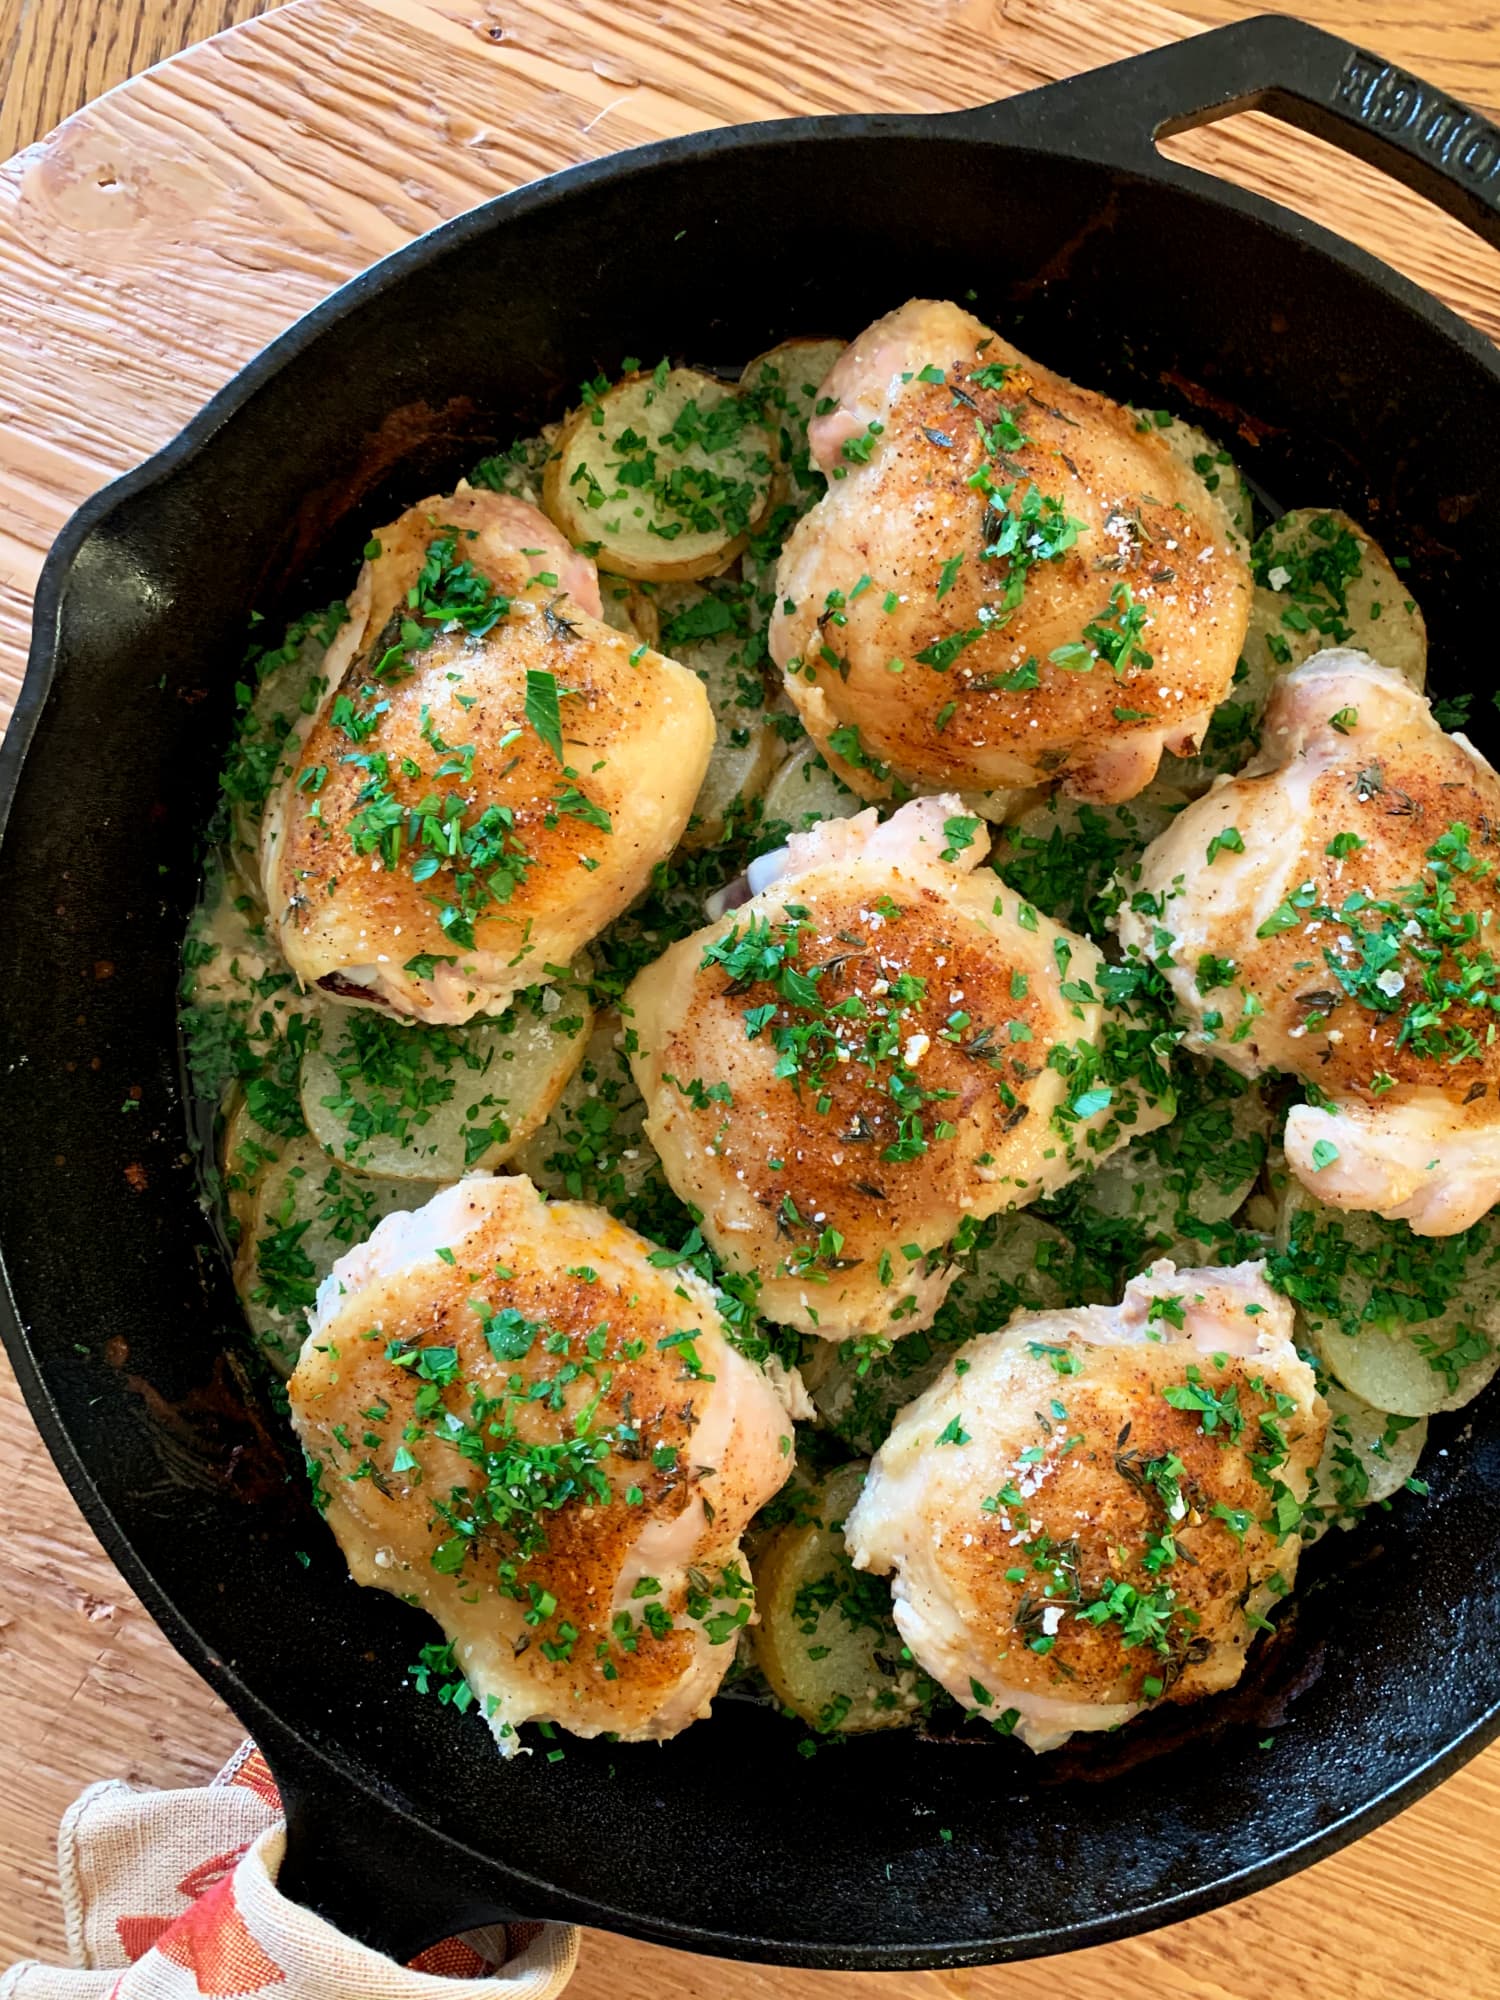 Ina Garten’s New Chicken Recipe Is One of the Best Things I’ve Made All Year